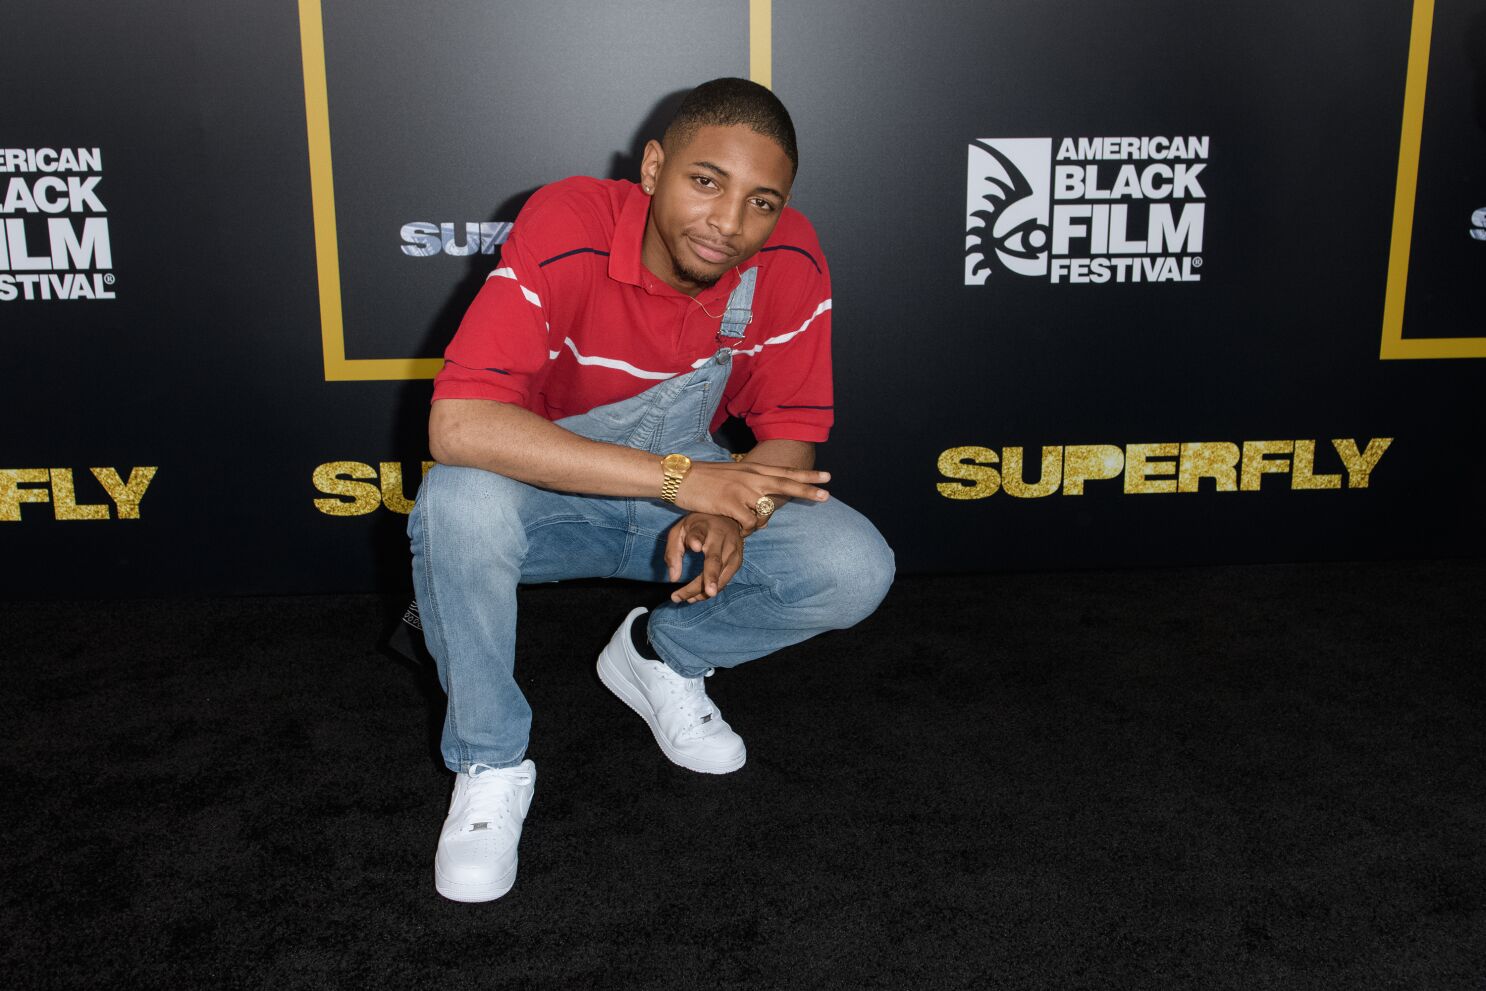 Kaalan Walker, who has a film credit in the film SuperFly